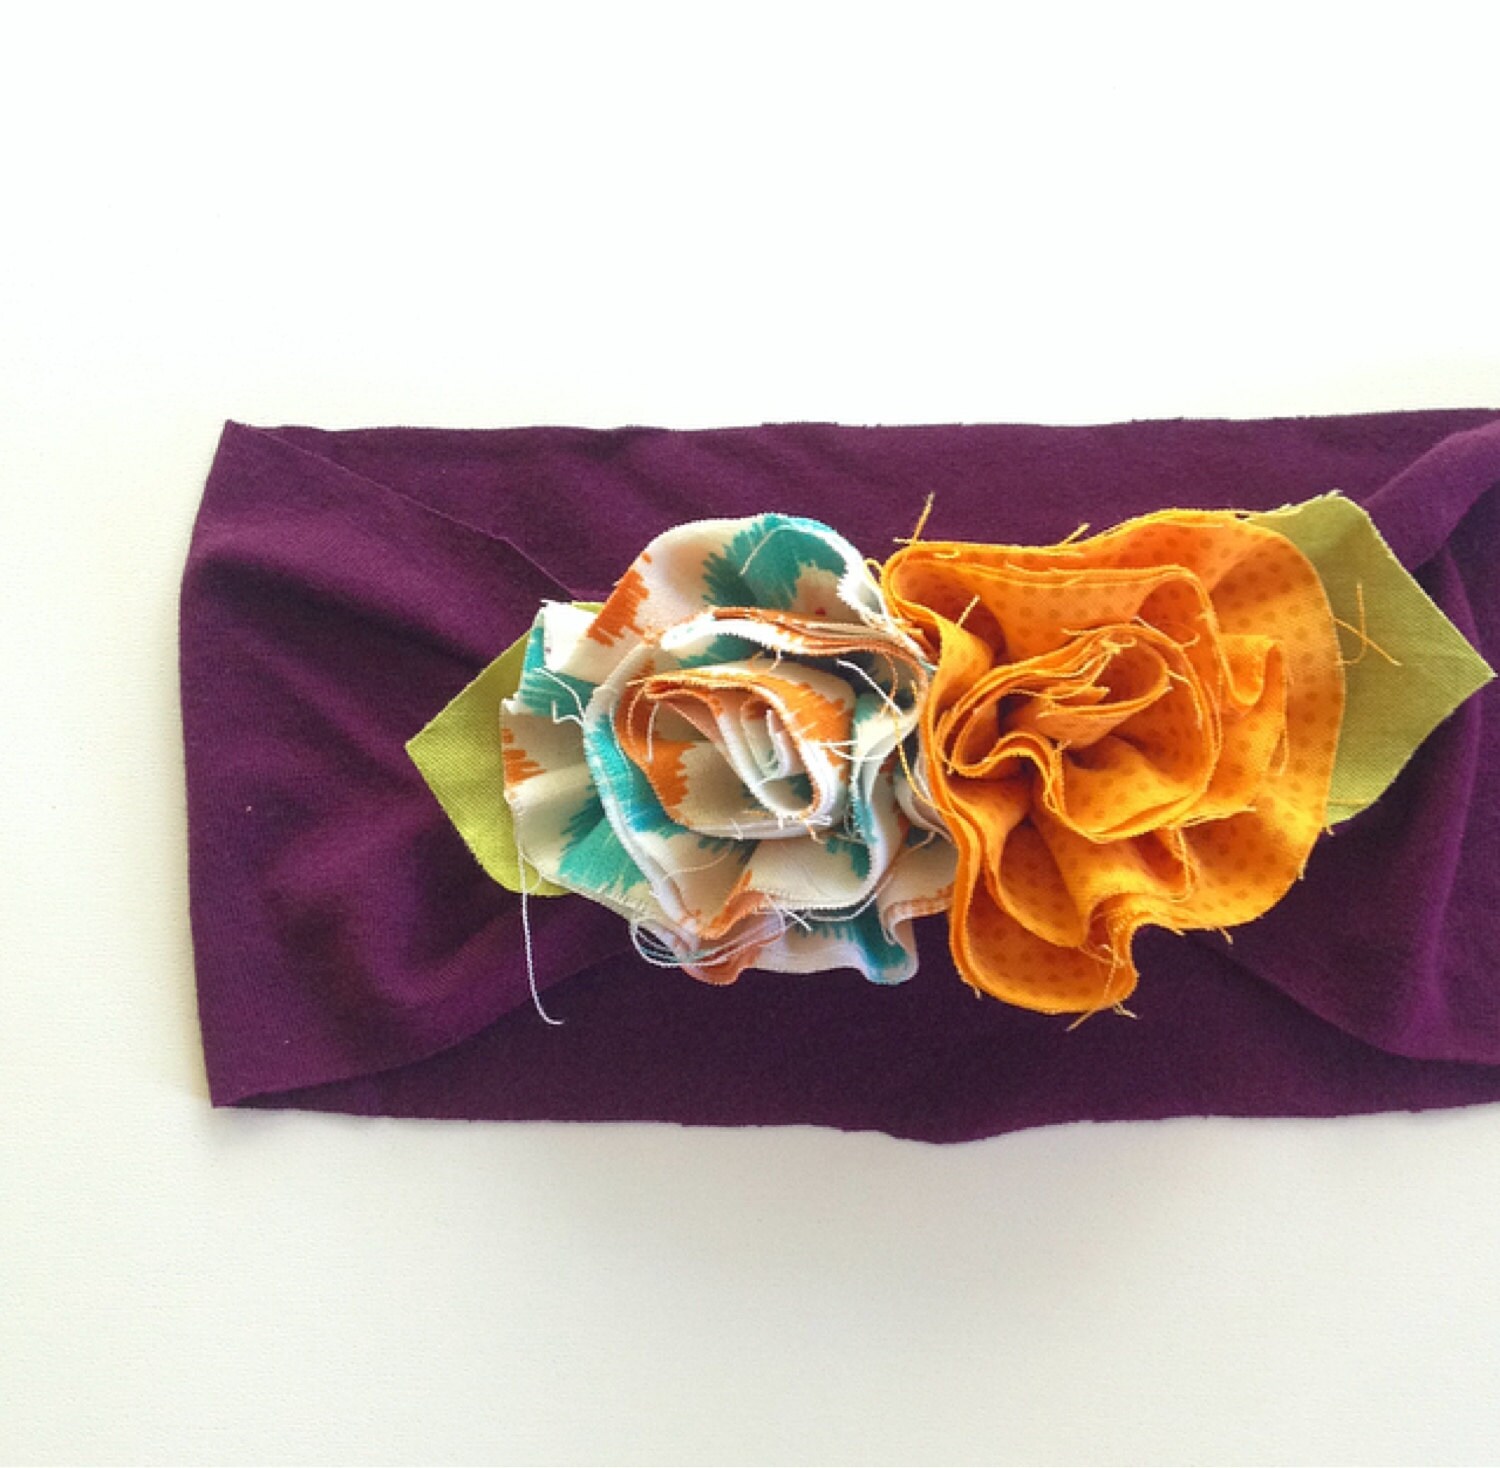 402 New baby headband leaves marks 684 Fall Fabric Flower Stretch Headband Baby Toddler by HeadsUpKids 